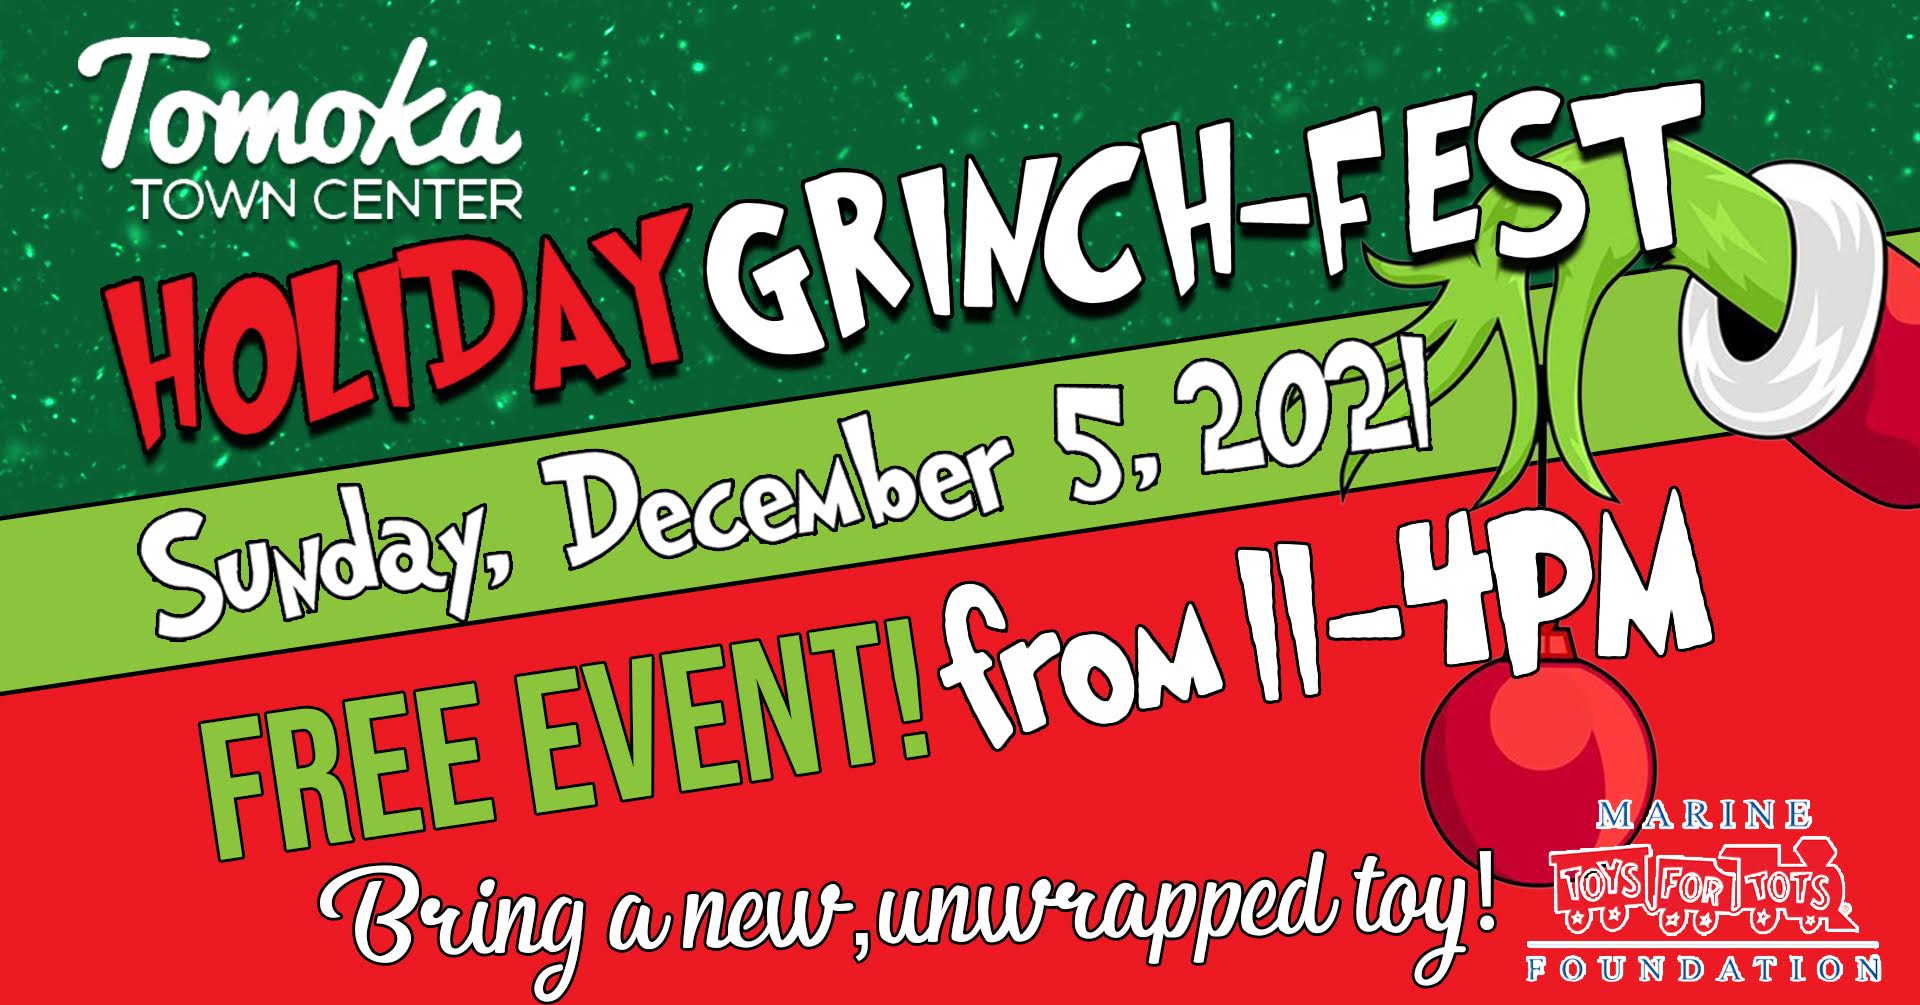 Tomoka Town Center GrinchFest FREE Holiday Event for the Whole